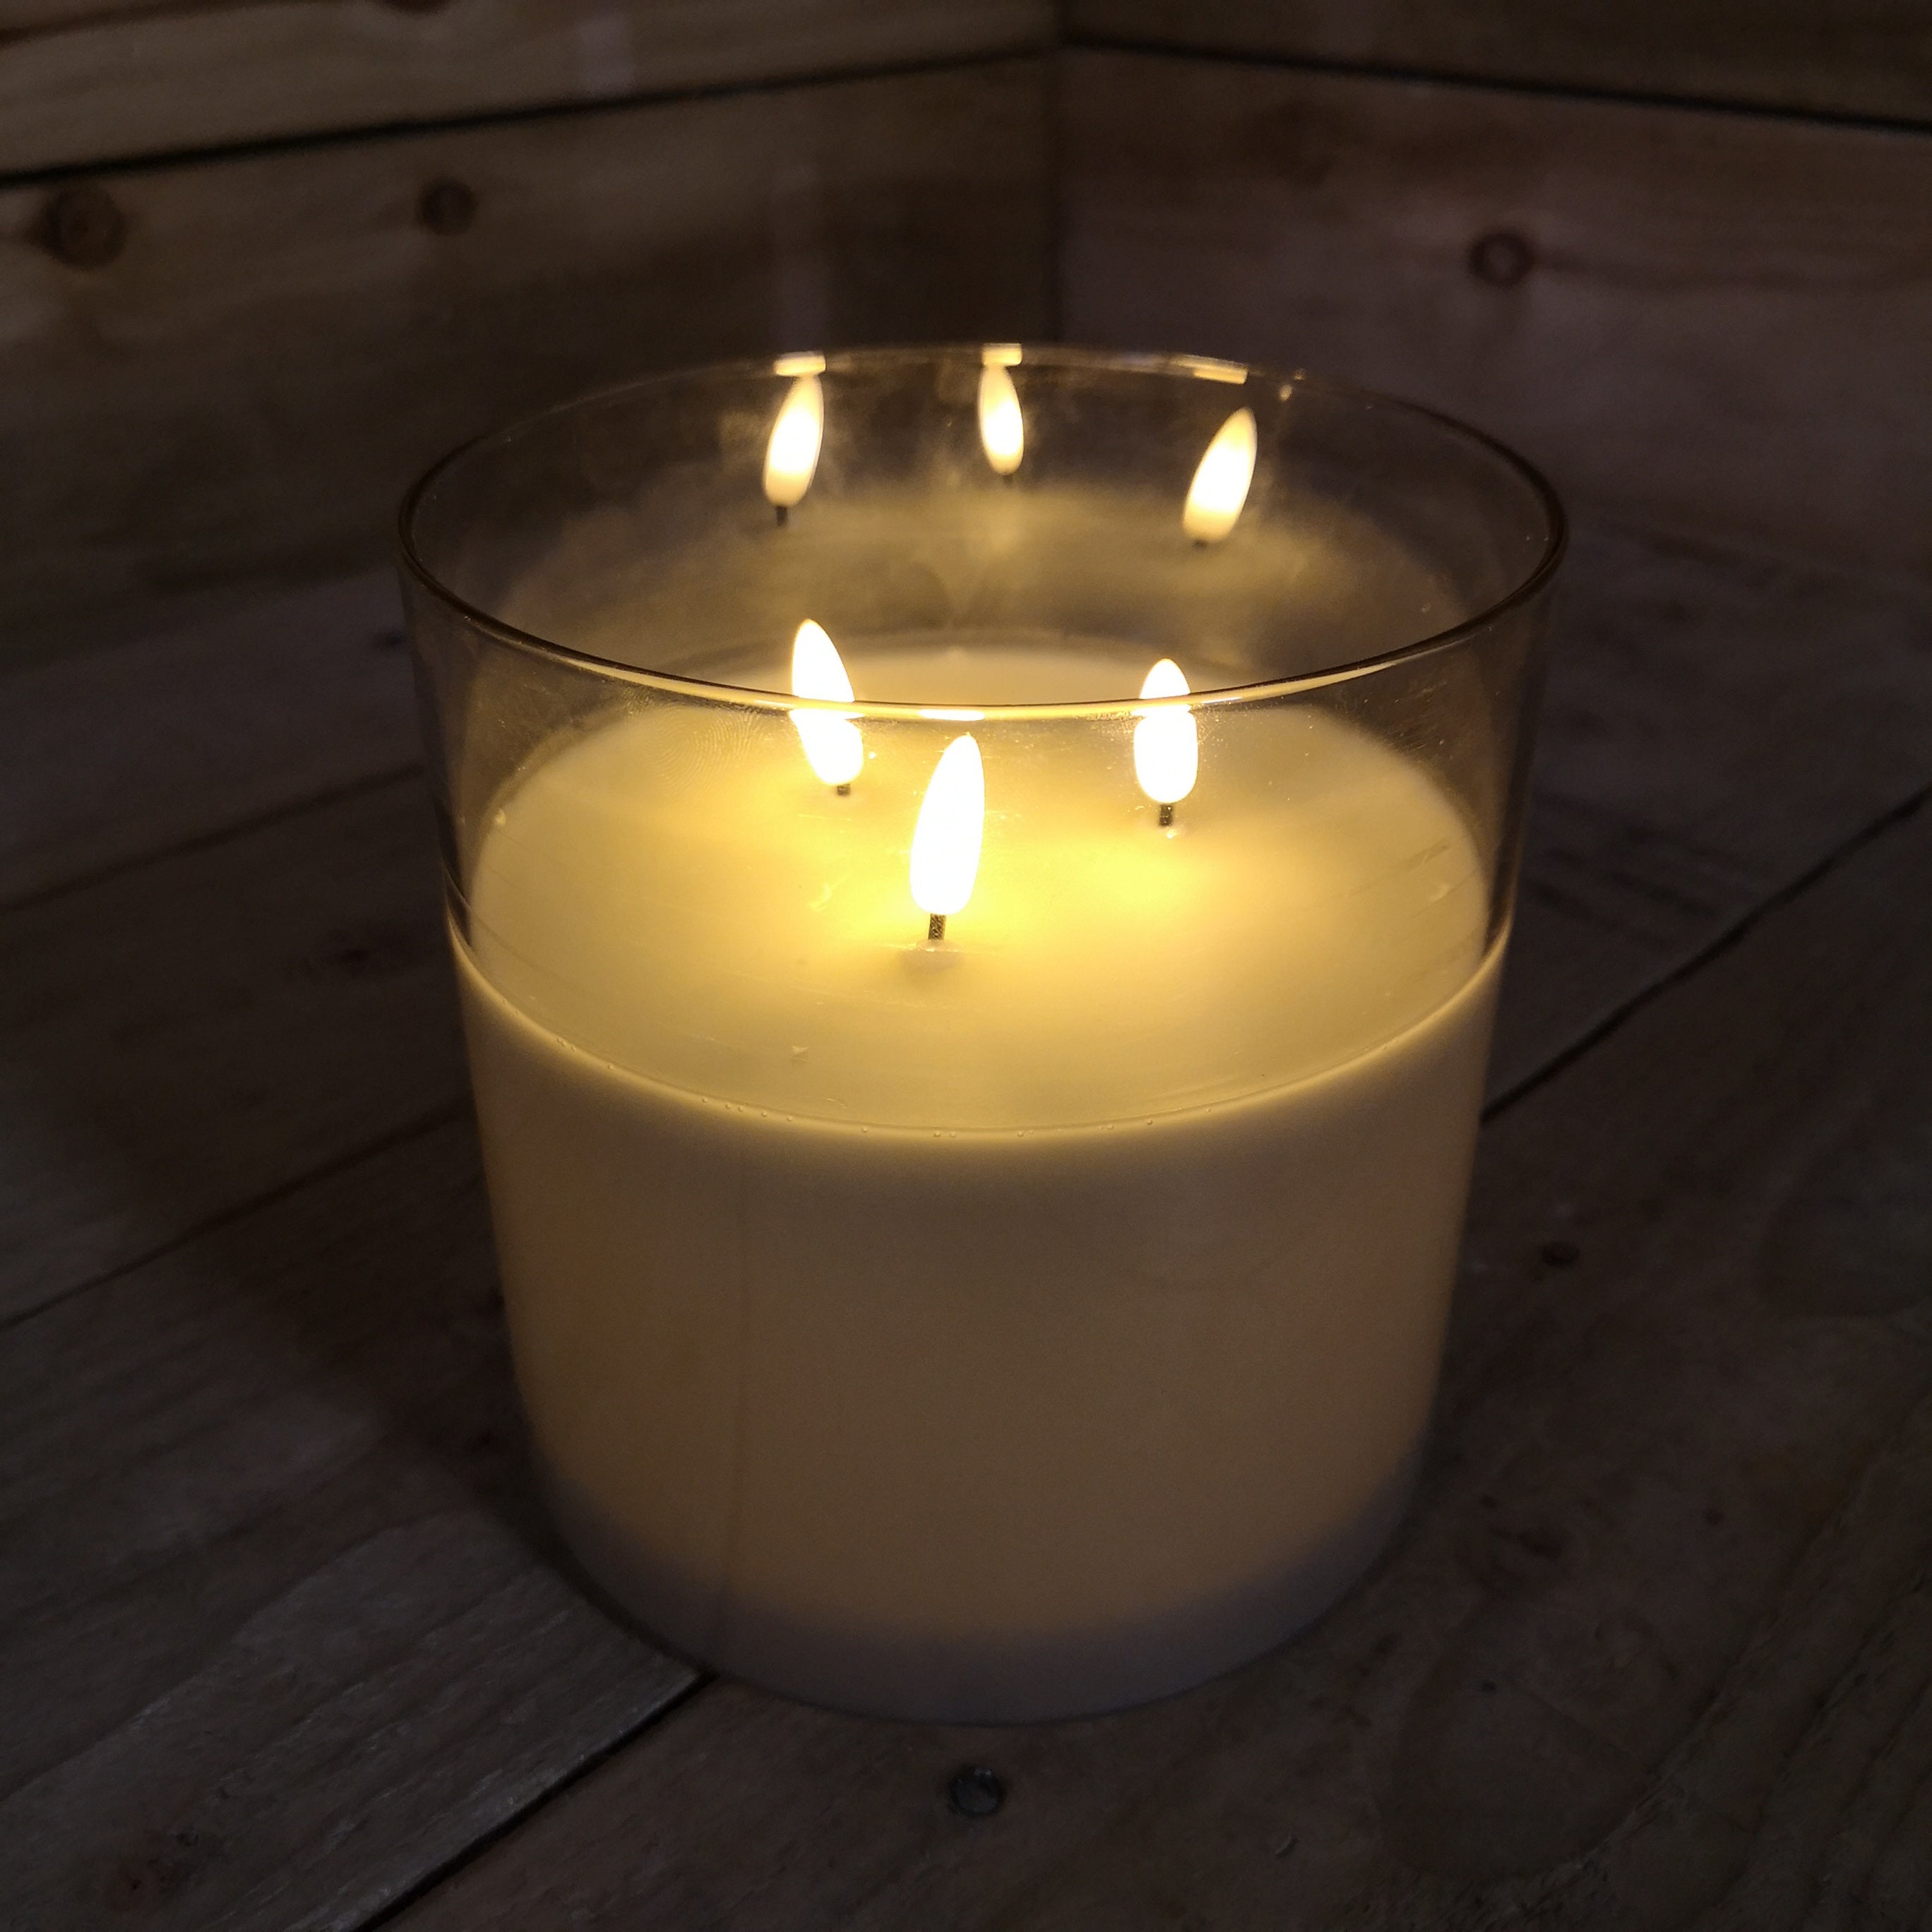 15 x15cm Triple Flame Real Wax Christmas Candle in Smoke Grey Glass with Timer, Dimmer and Remote